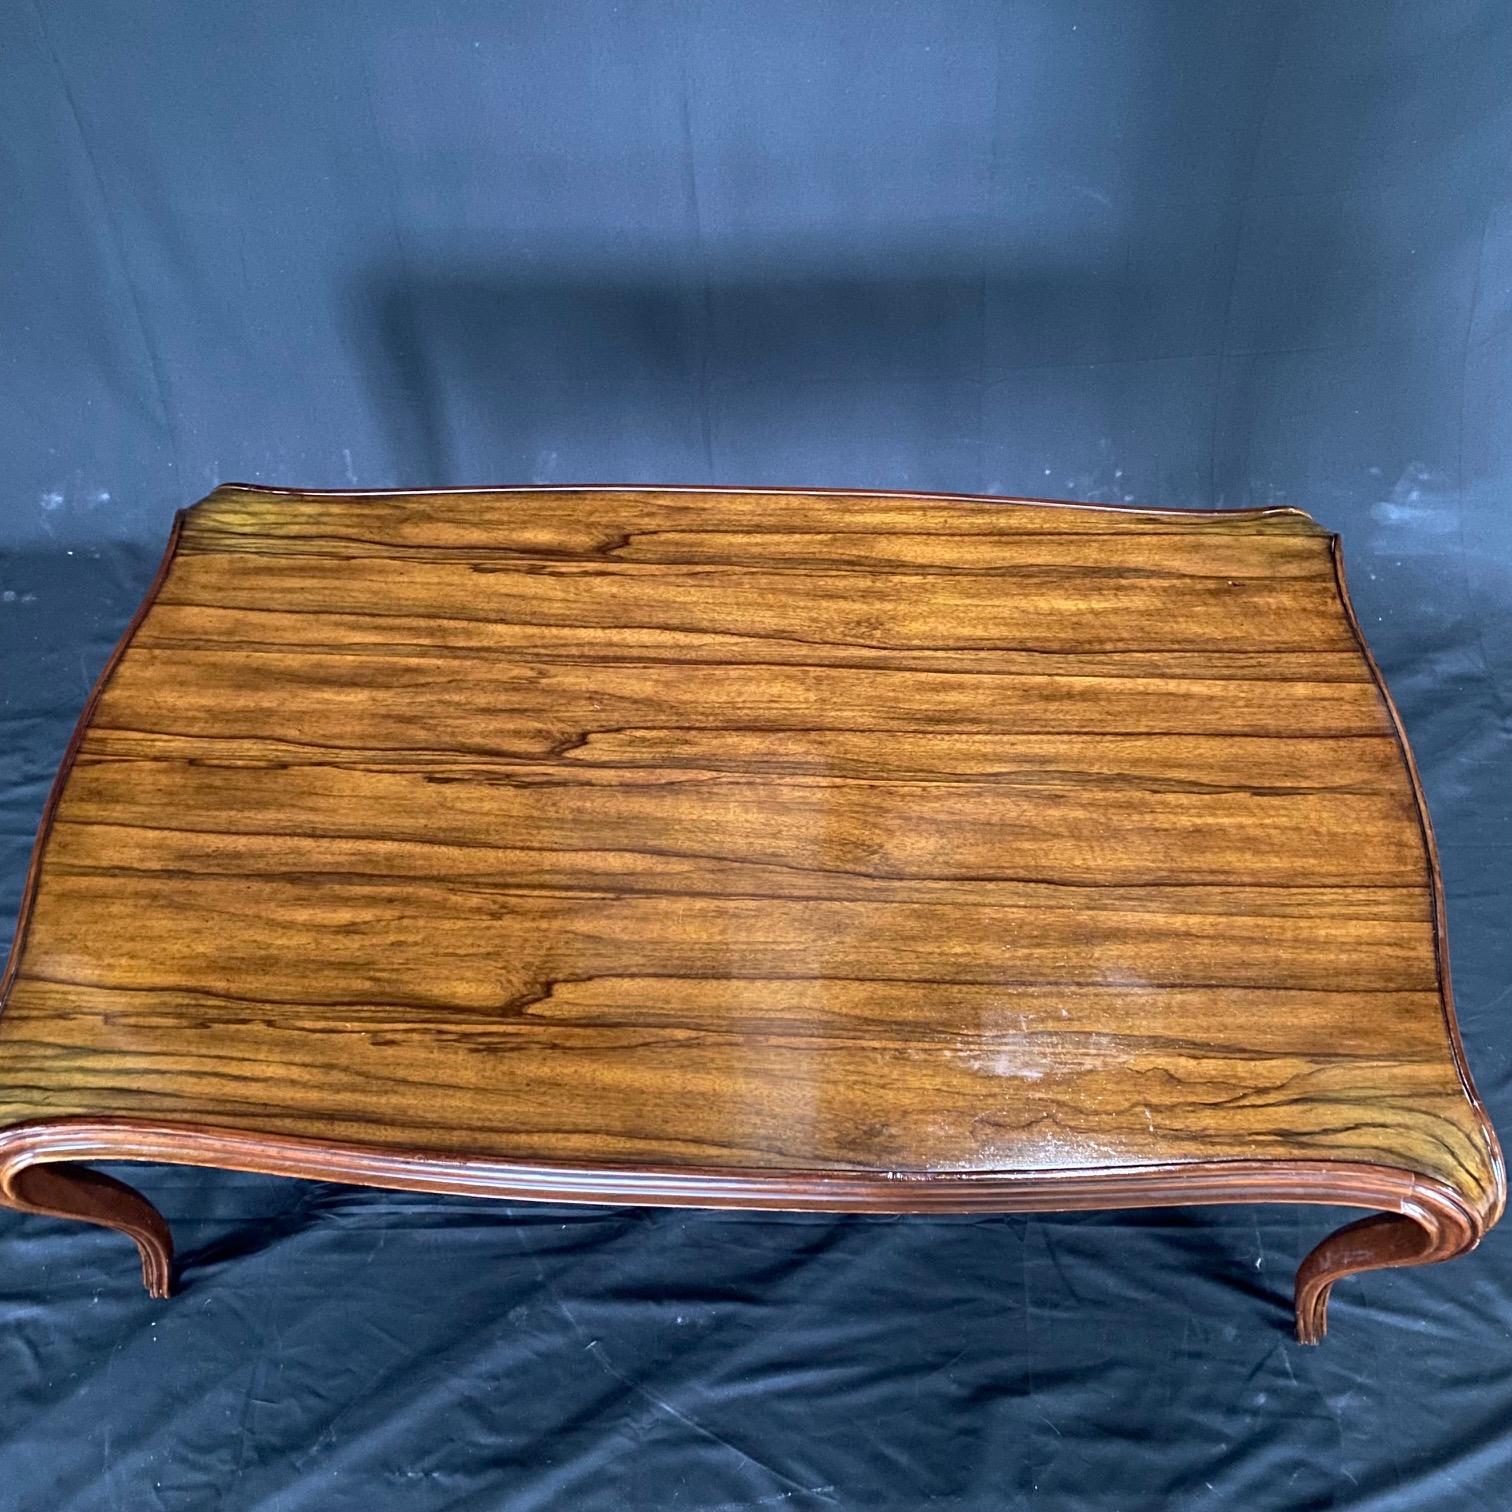 Lovely coffee table or cocktail table with sinuous curves by Keno Bros., for Theodore Alexander, recognized for their modern classic and mid-century modern styling. No longer made, this rosewood veneer table is made by Keno Bros., who specializes in